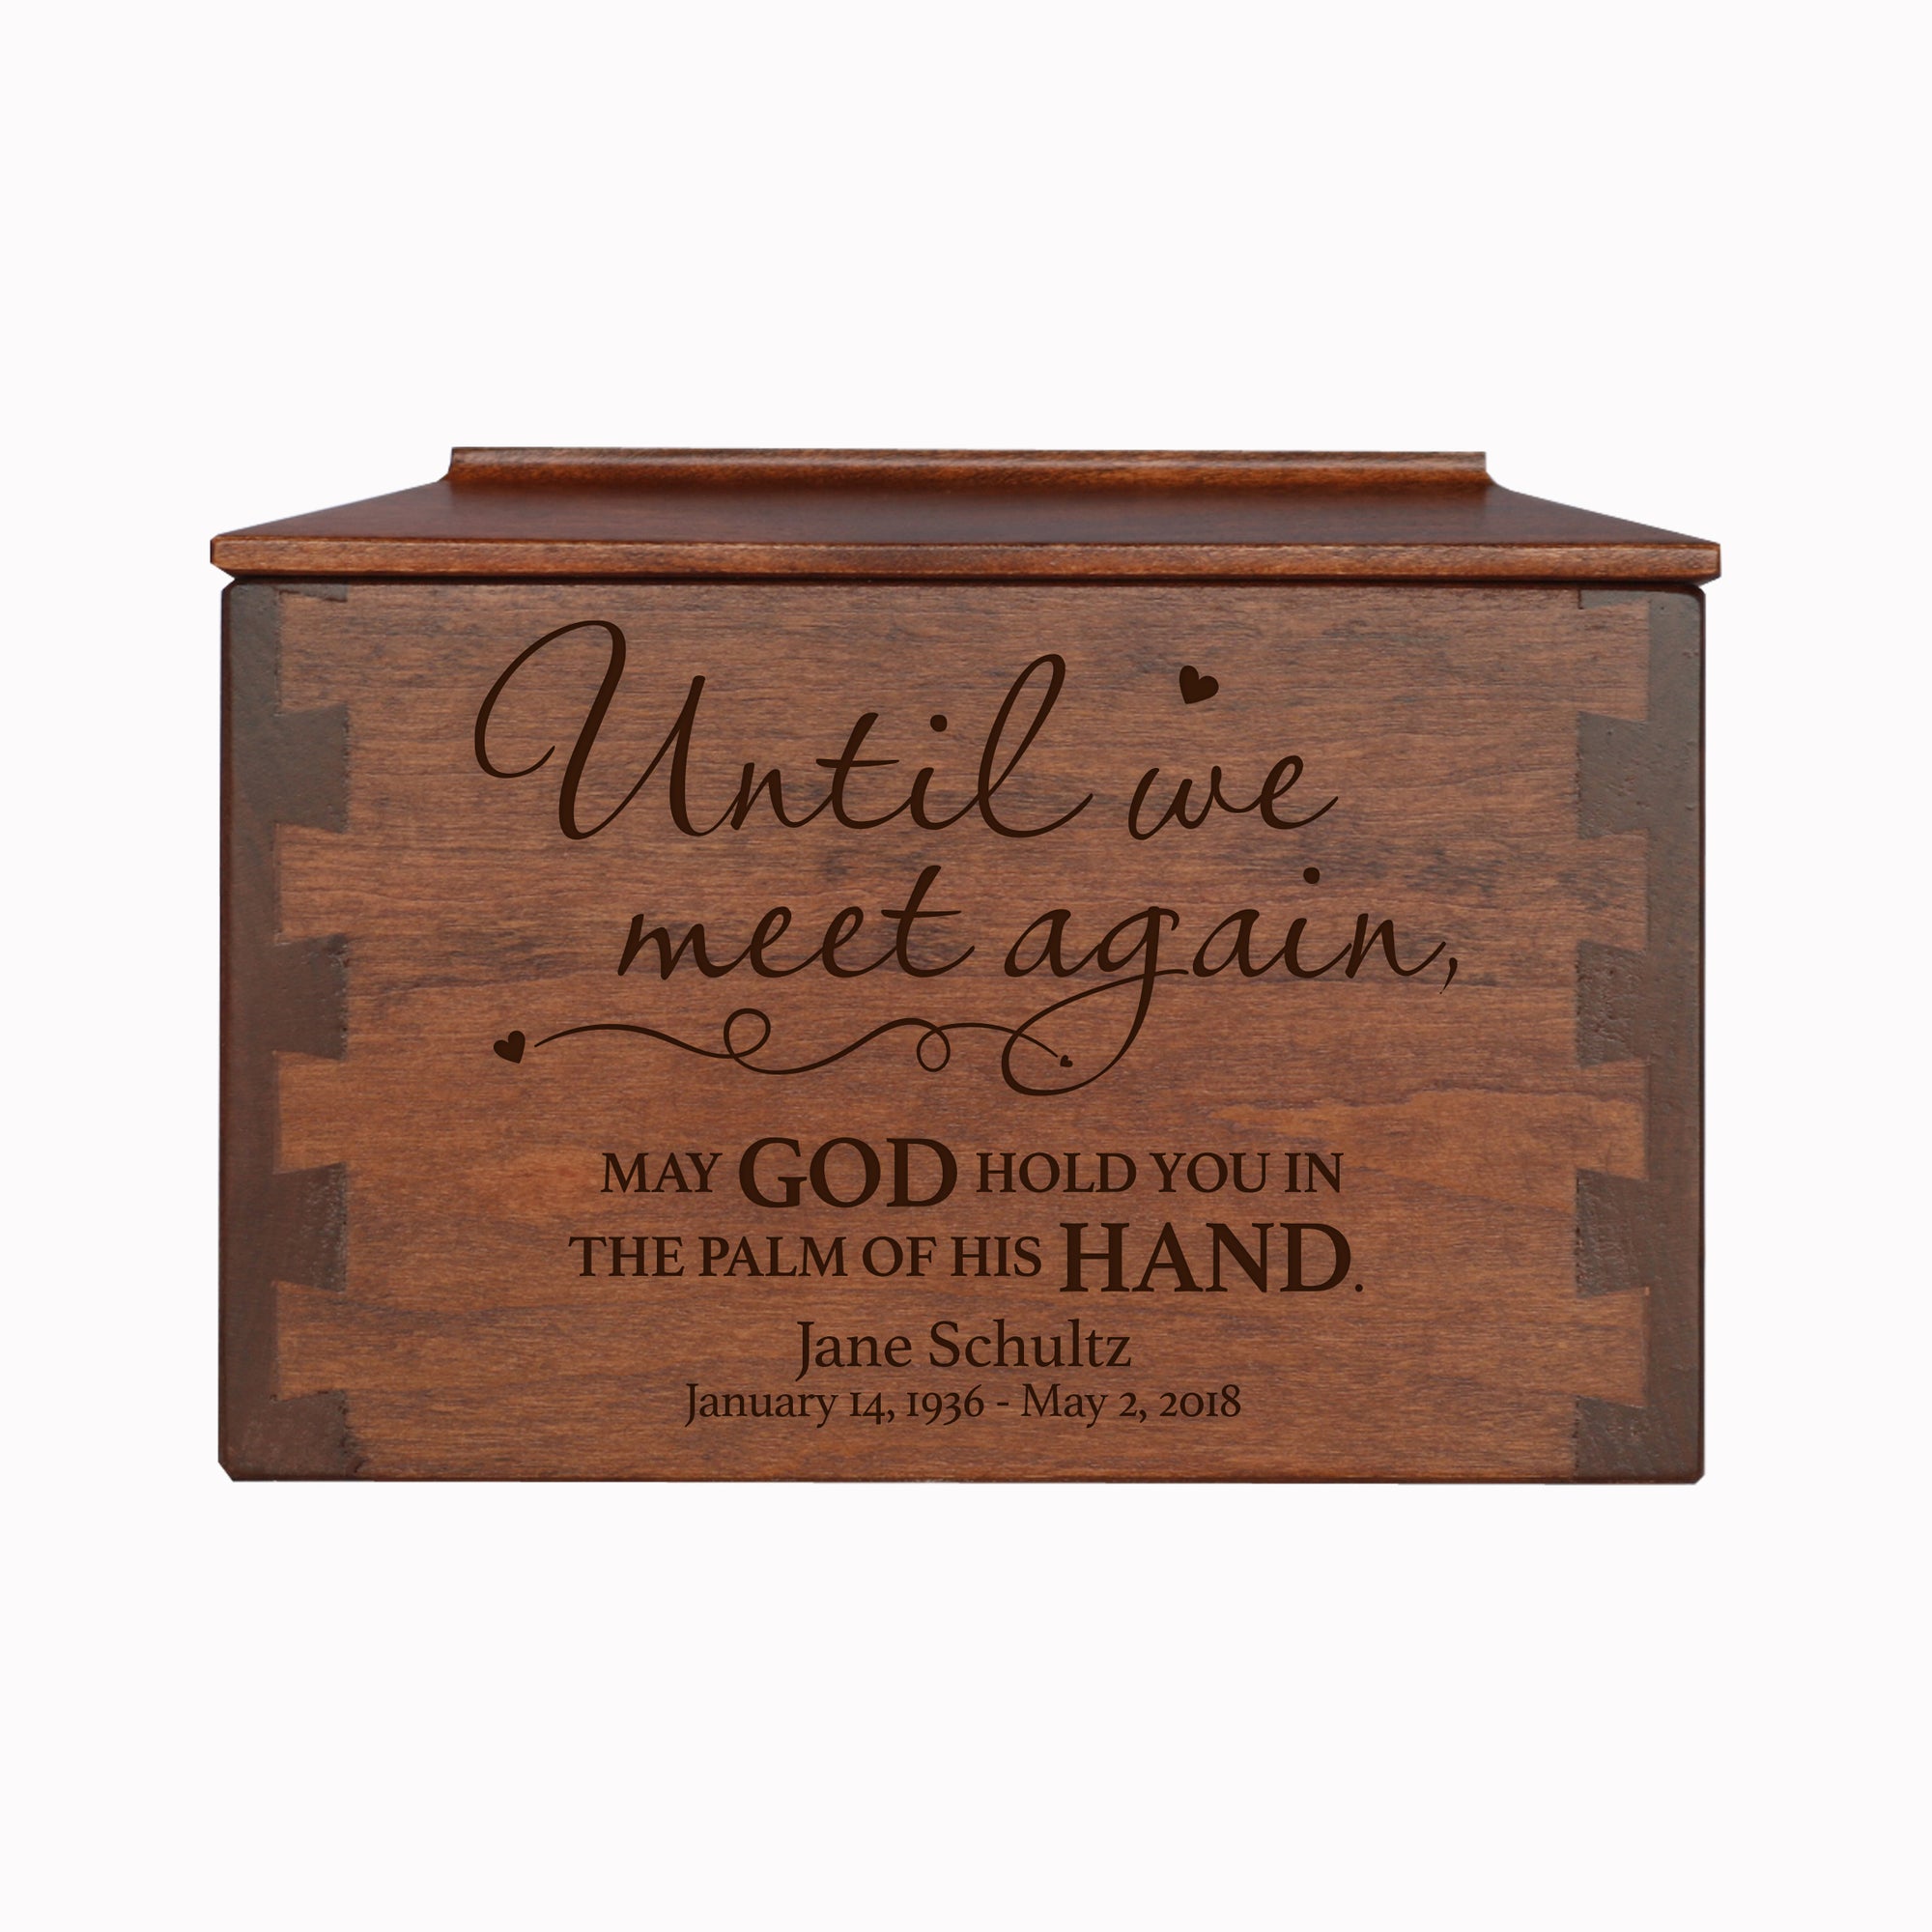 Until We Meet Again Personalized Memorial Decorative Dovetail Cremation Urn For Human Ashes Funeral and Condolence Keepsake